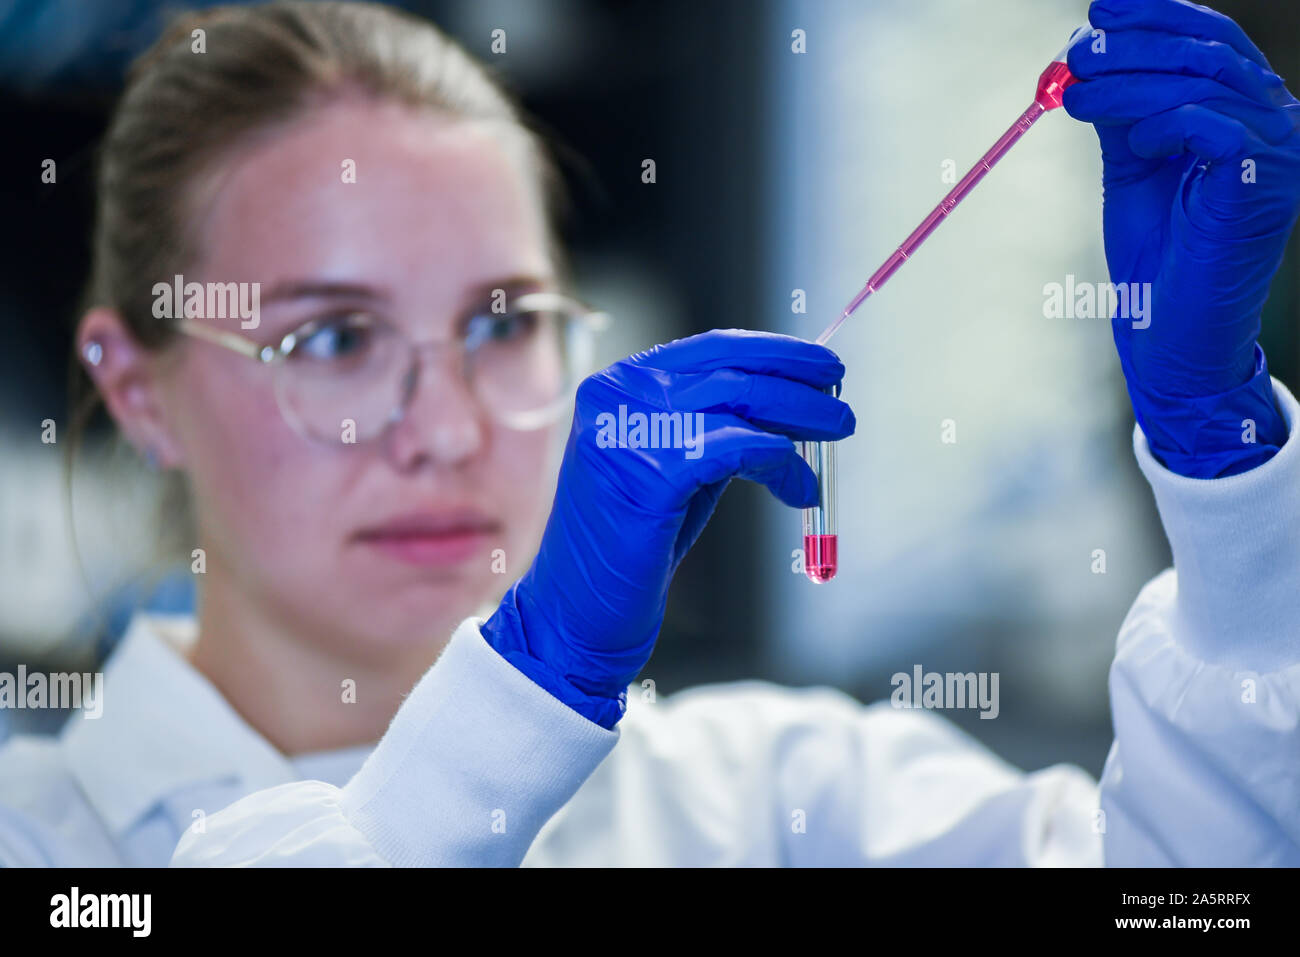 Young science student performing biotechnological experiment in laboratory Stock Photo